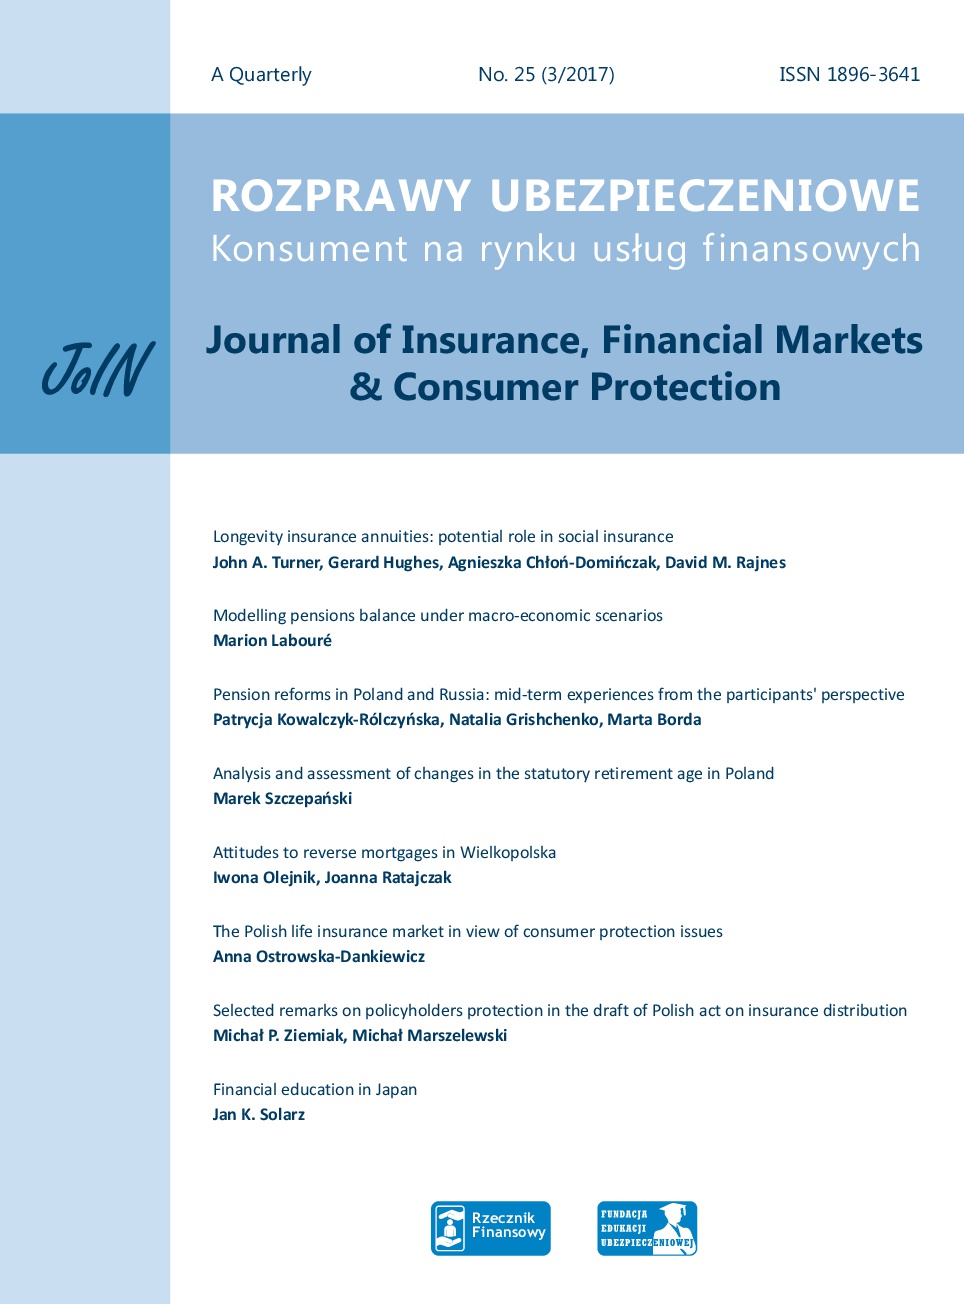 Selected remarks on policyholders protection in the draft of Polish act on insurance distribution Cover Image